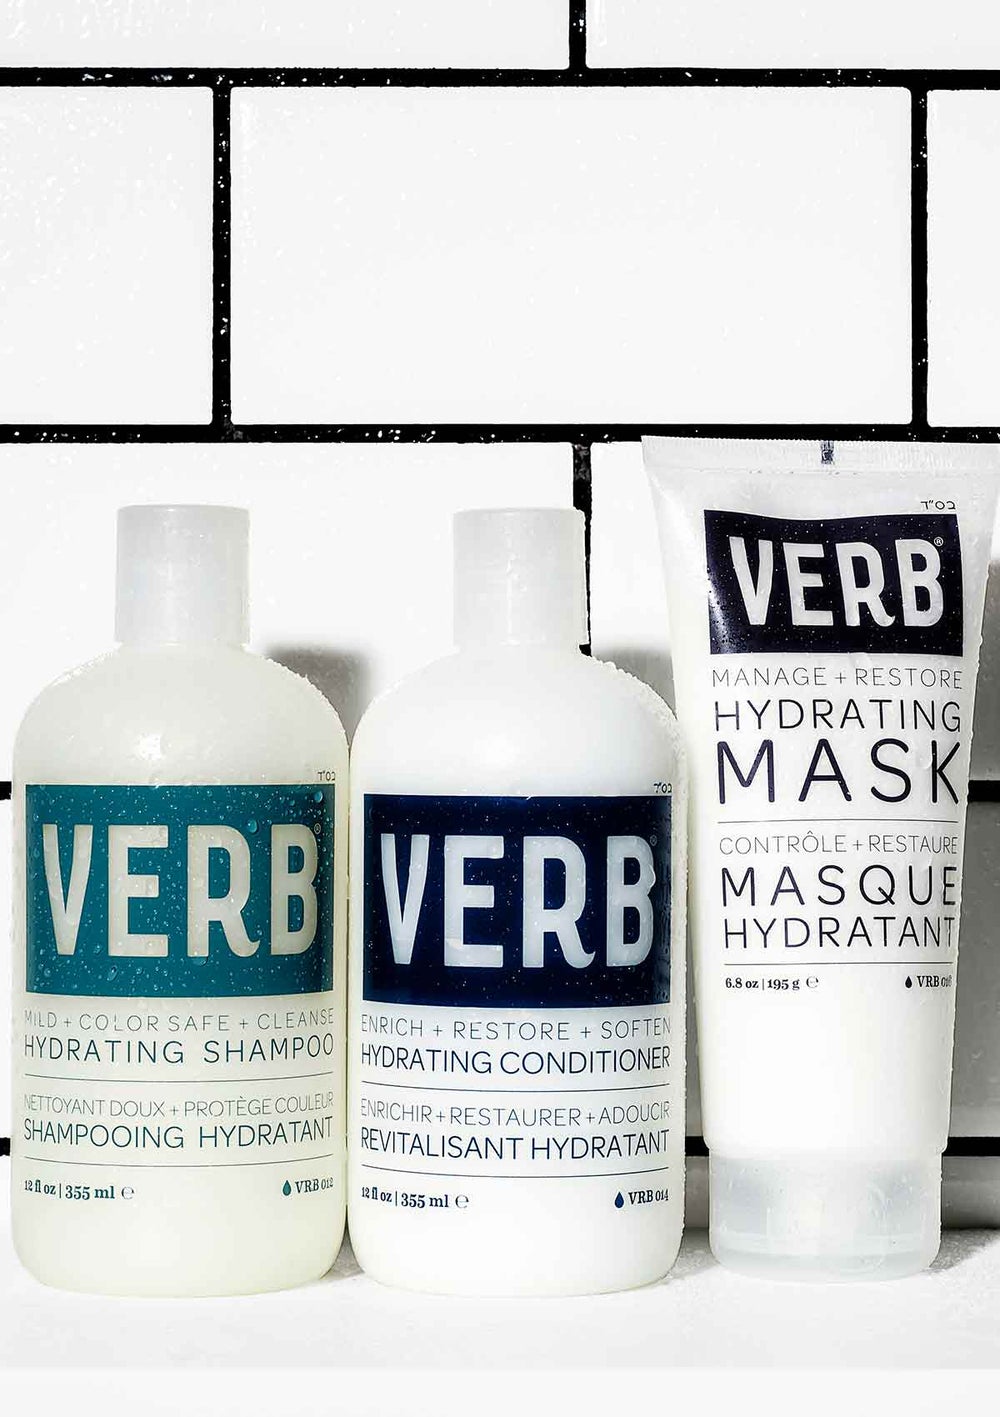 Verb - Hydrating Shampoo Mild + Color Safe + Cleanse |32 oz| - by Verb |ProCare Outlet|